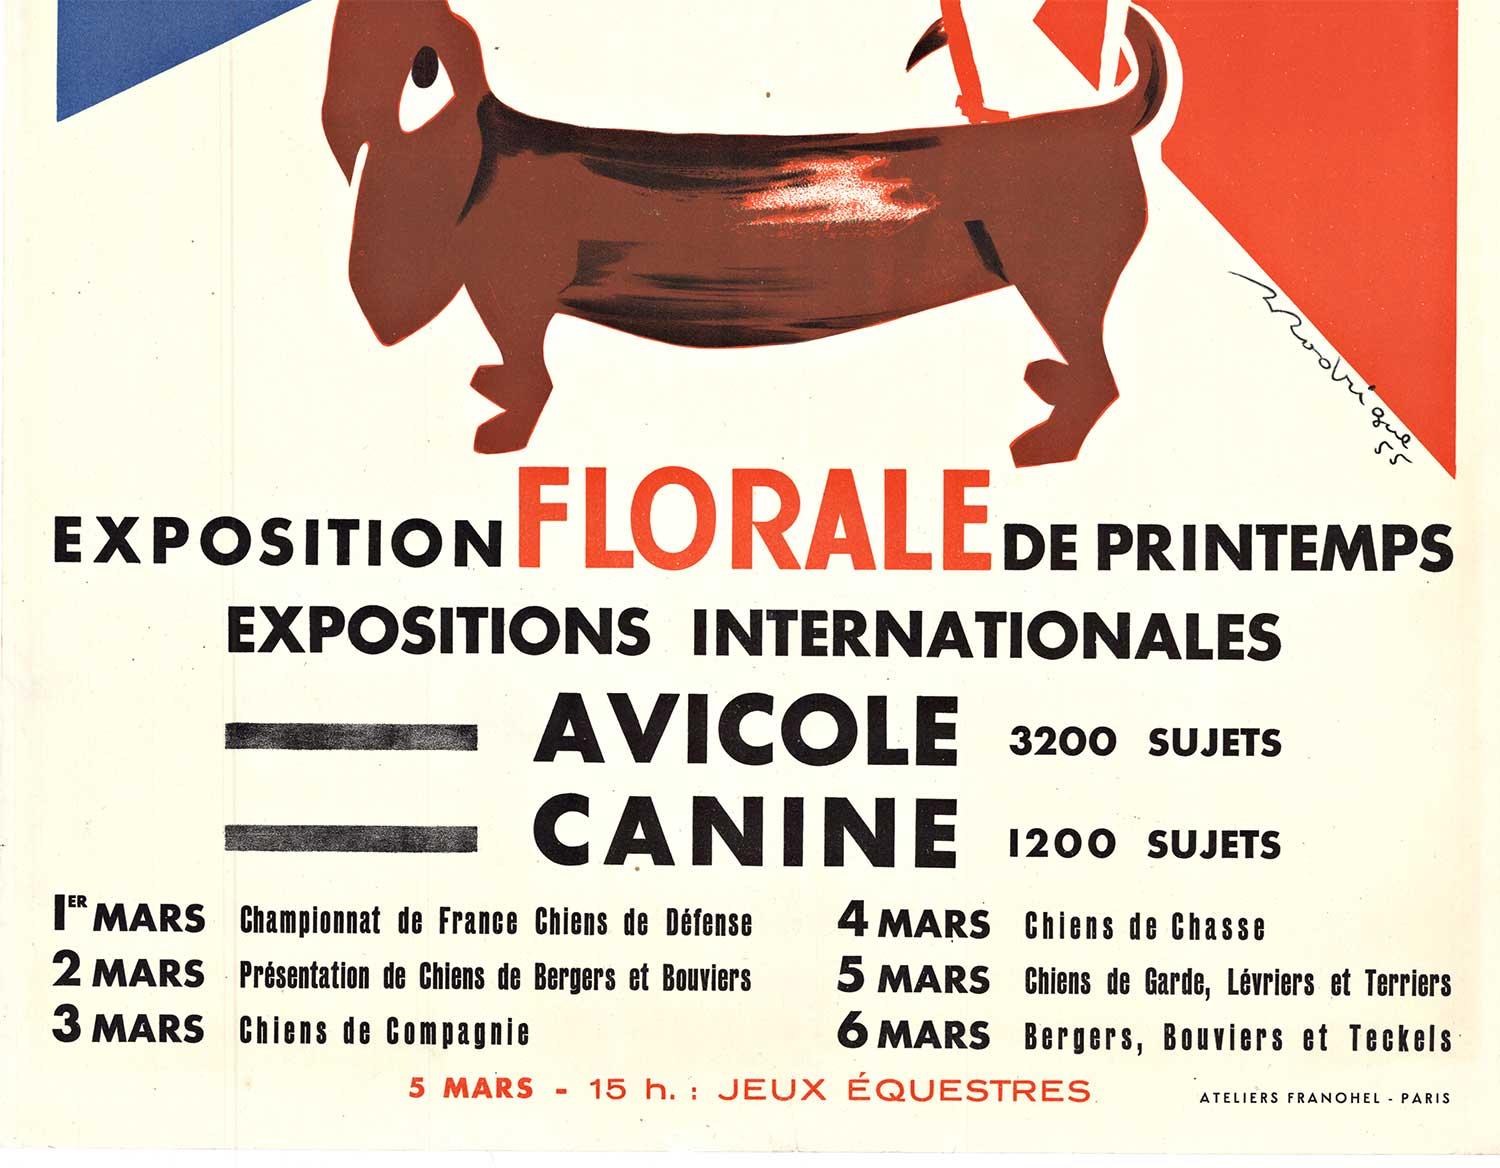 Original Exposition Florale de Printemps vintage French poster.    Archival linen backed in very fine condition, ready to frame.   Printer:   Ateliers Franohel, Paris.

This exposition was held at the Porte de Versailles, (The Paris Expo Porte de